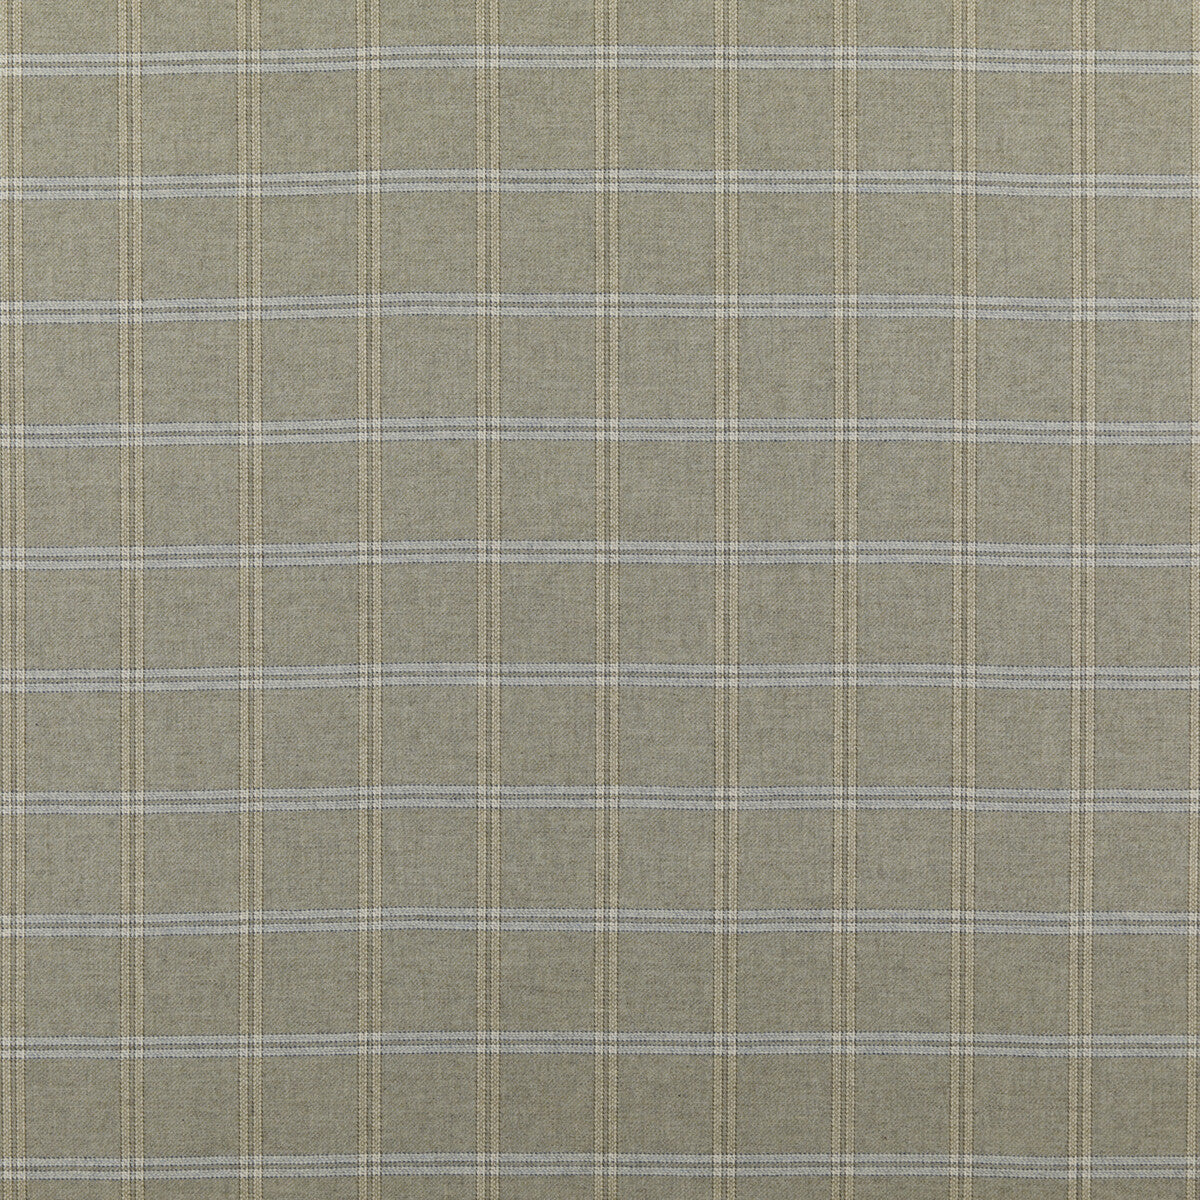 Walton fabric in stone color - pattern FD775.K102.0 - by Mulberry in the Modern Country collection